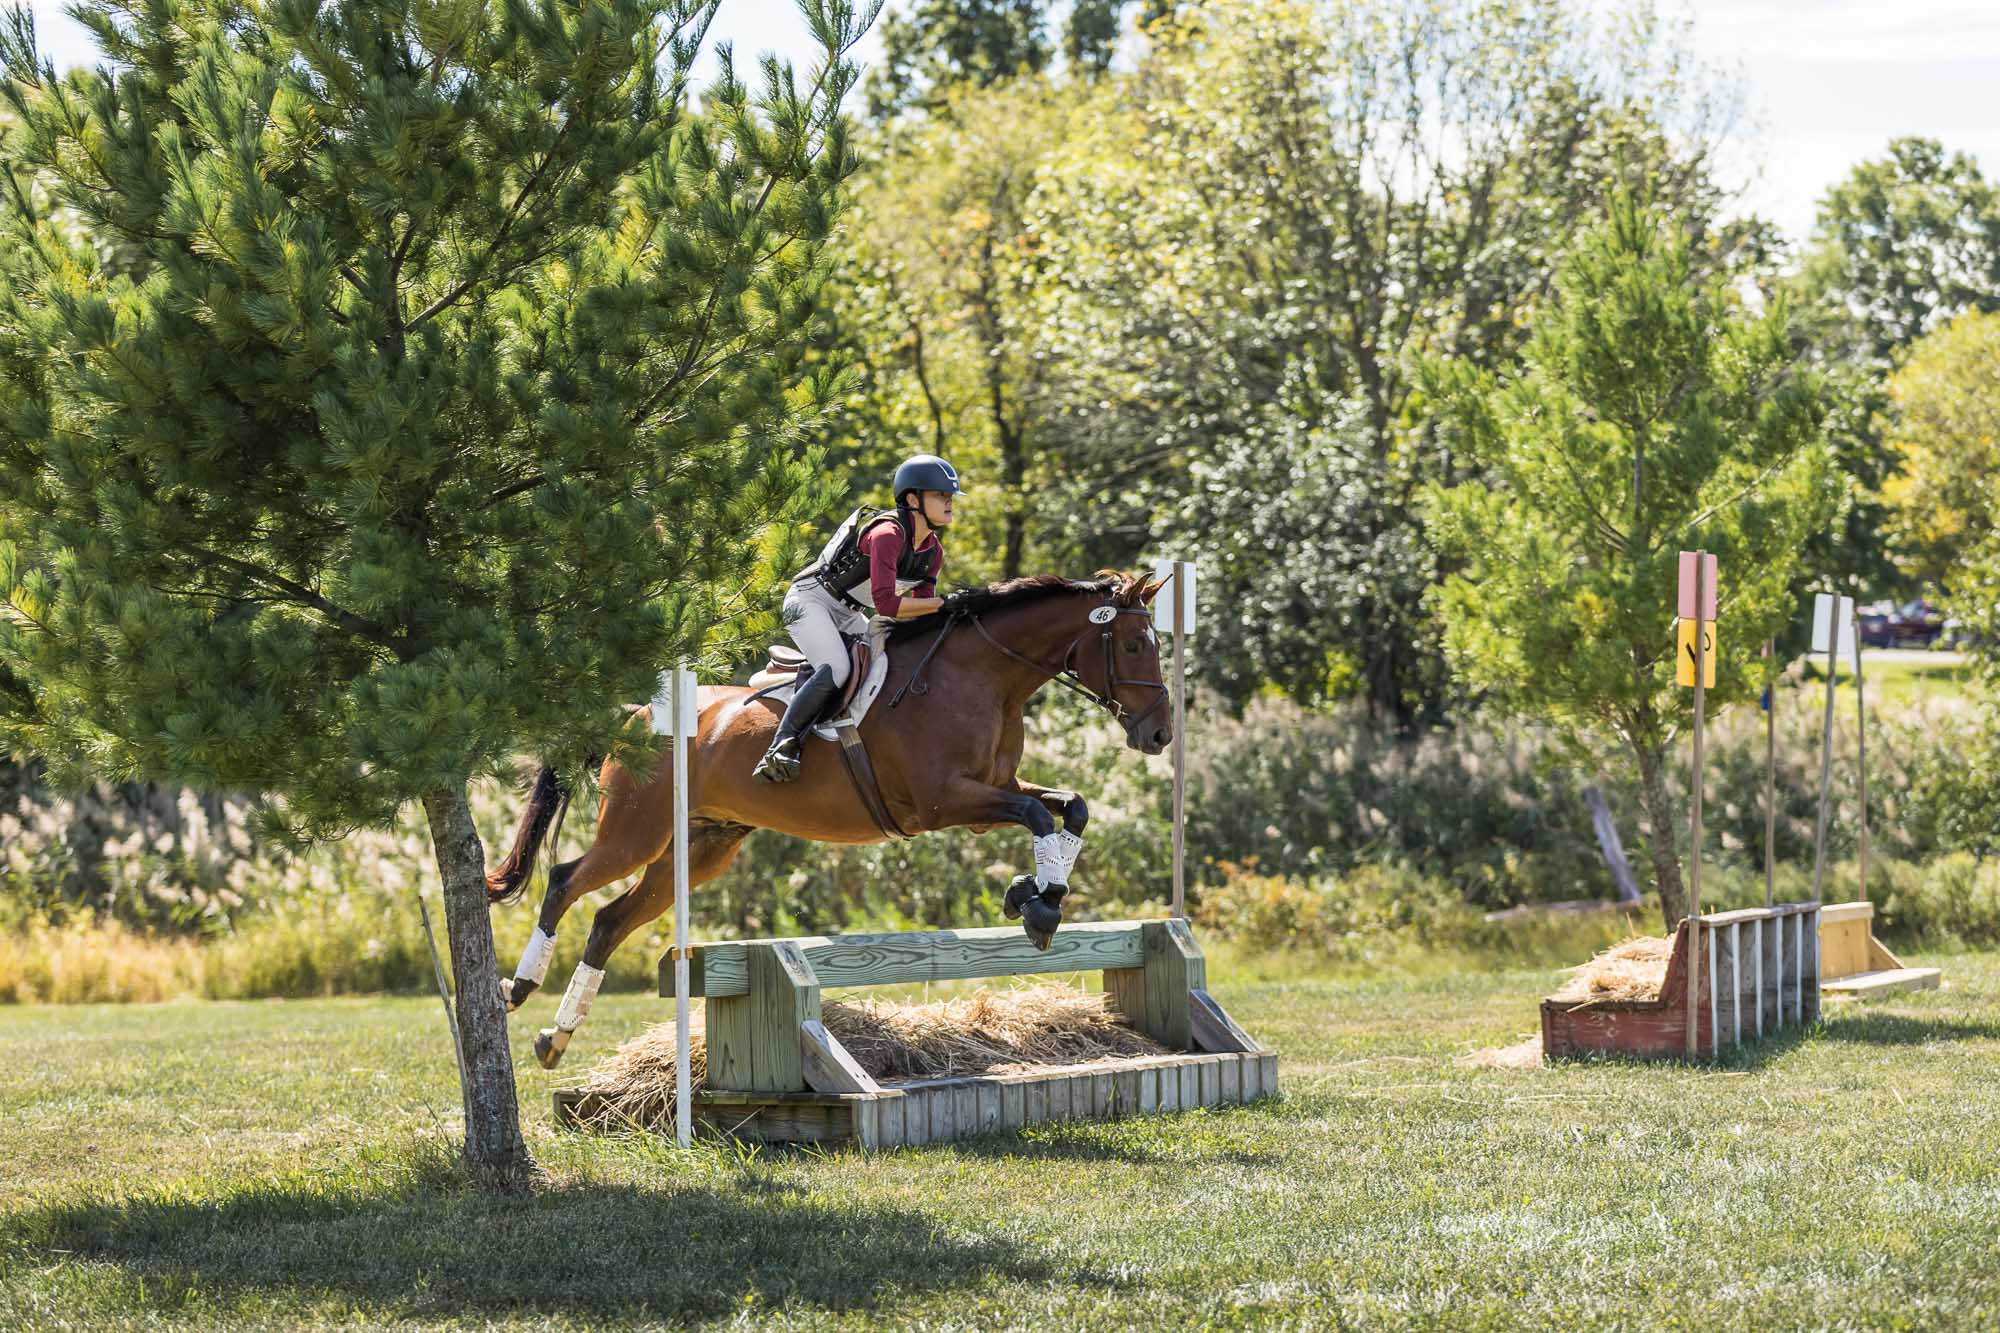 eventing at Horse Park of New Jersey